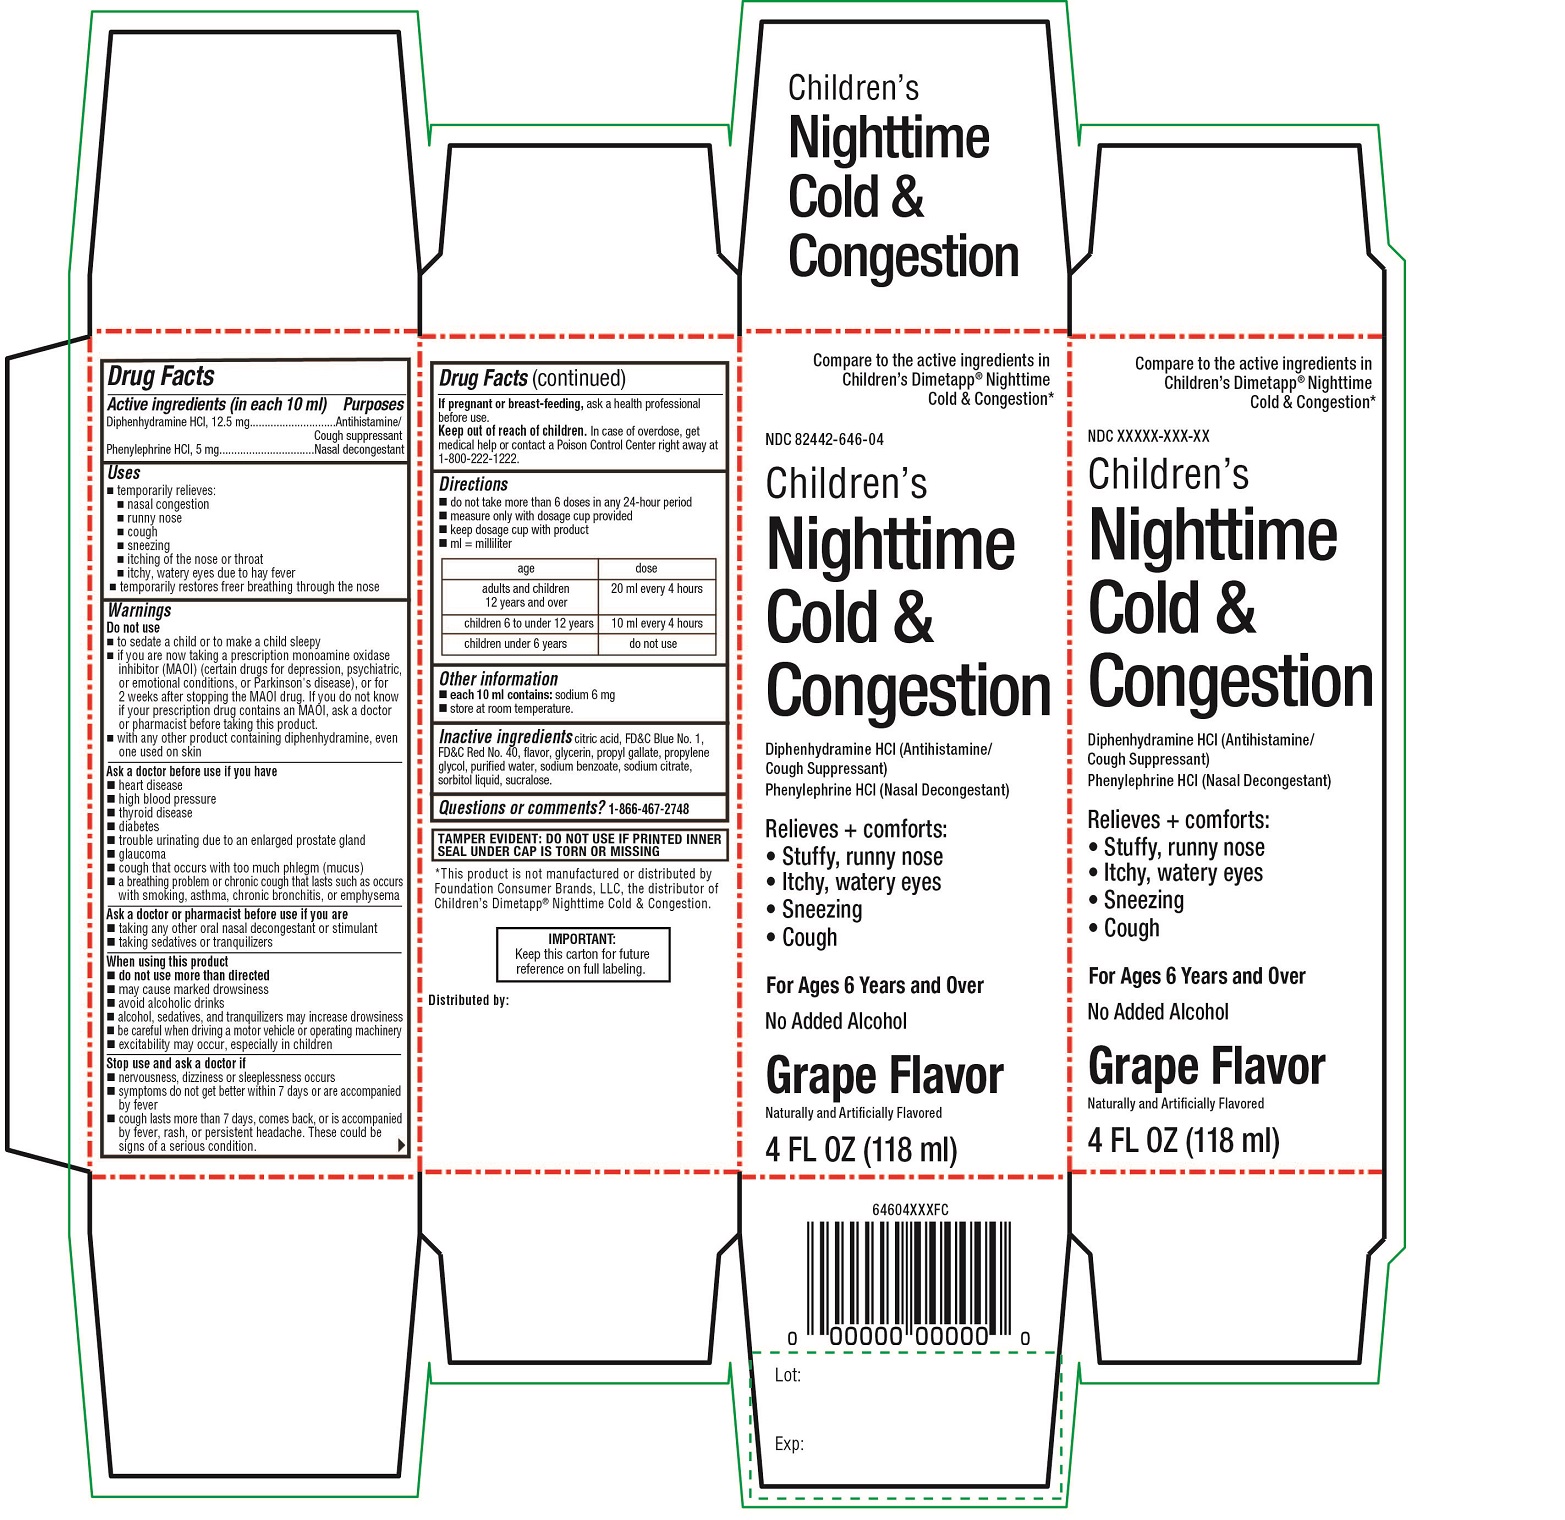 Target Chindren's Nighttime Cold & Cough Congestion 118 ml